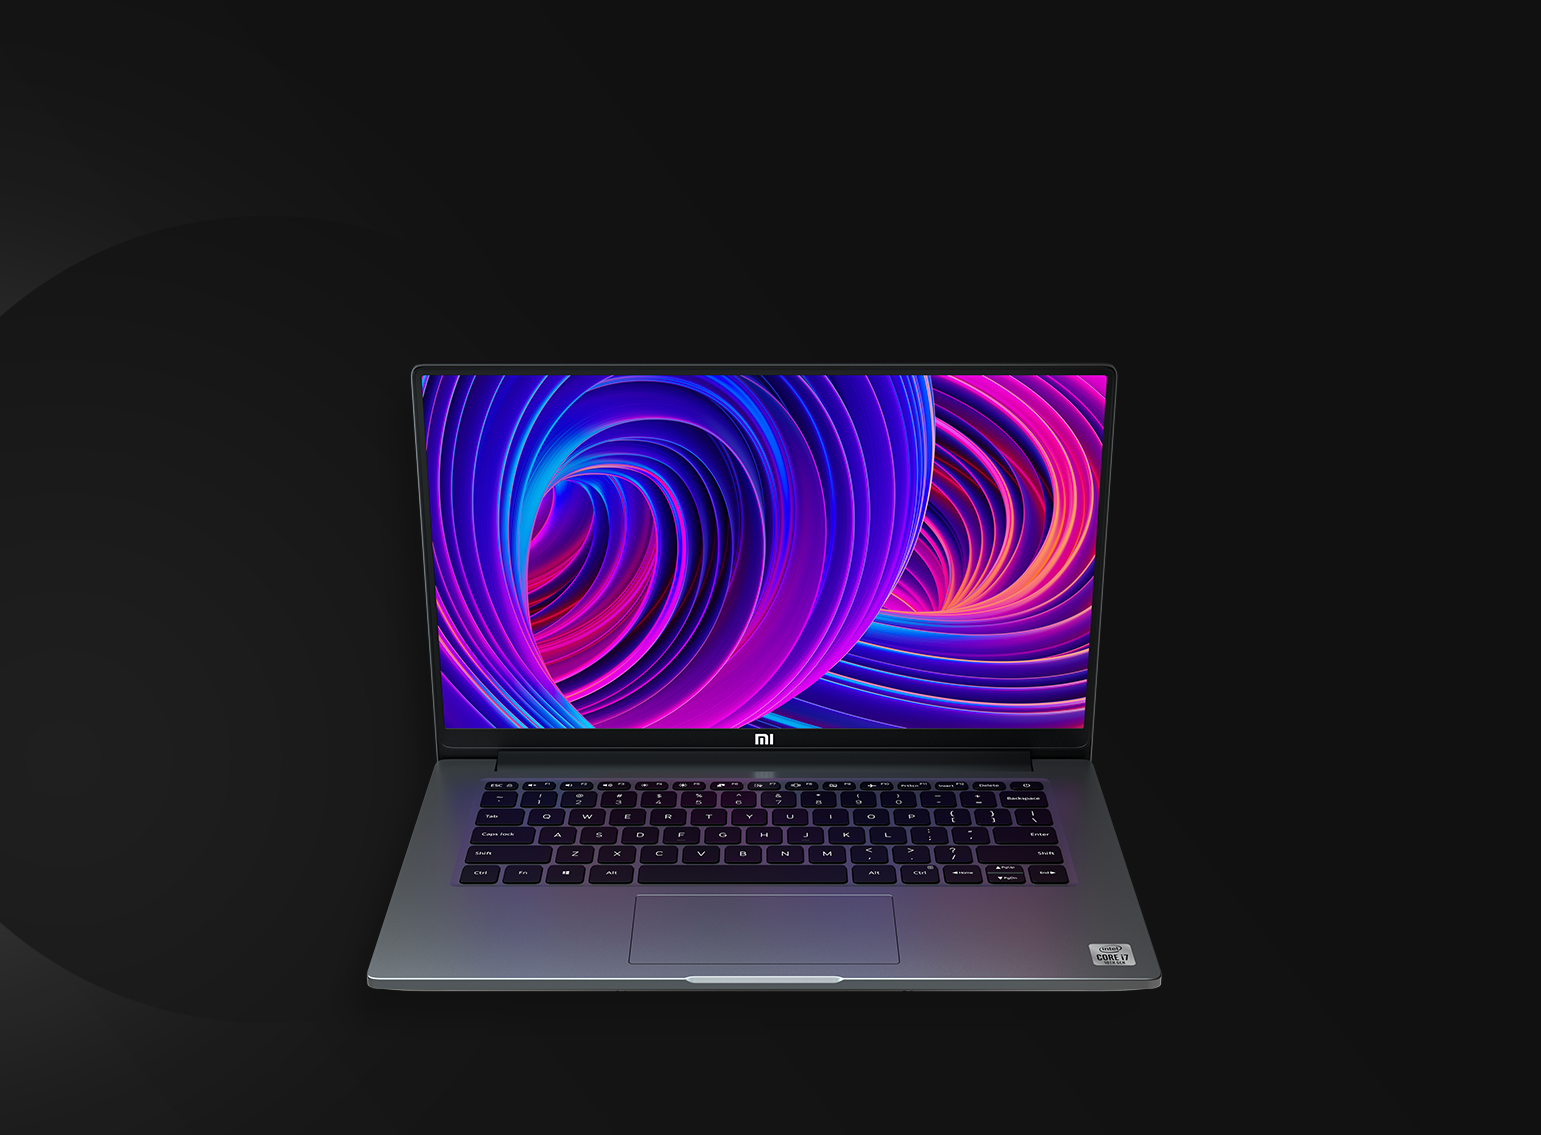 Xiaomi Mi Notebook 14 and Mi Notebook 14 Horizon Laptop Review in Hindi Price in India Specification Features Processor Graphics Battery etc सभी जानकारी हिंदी में